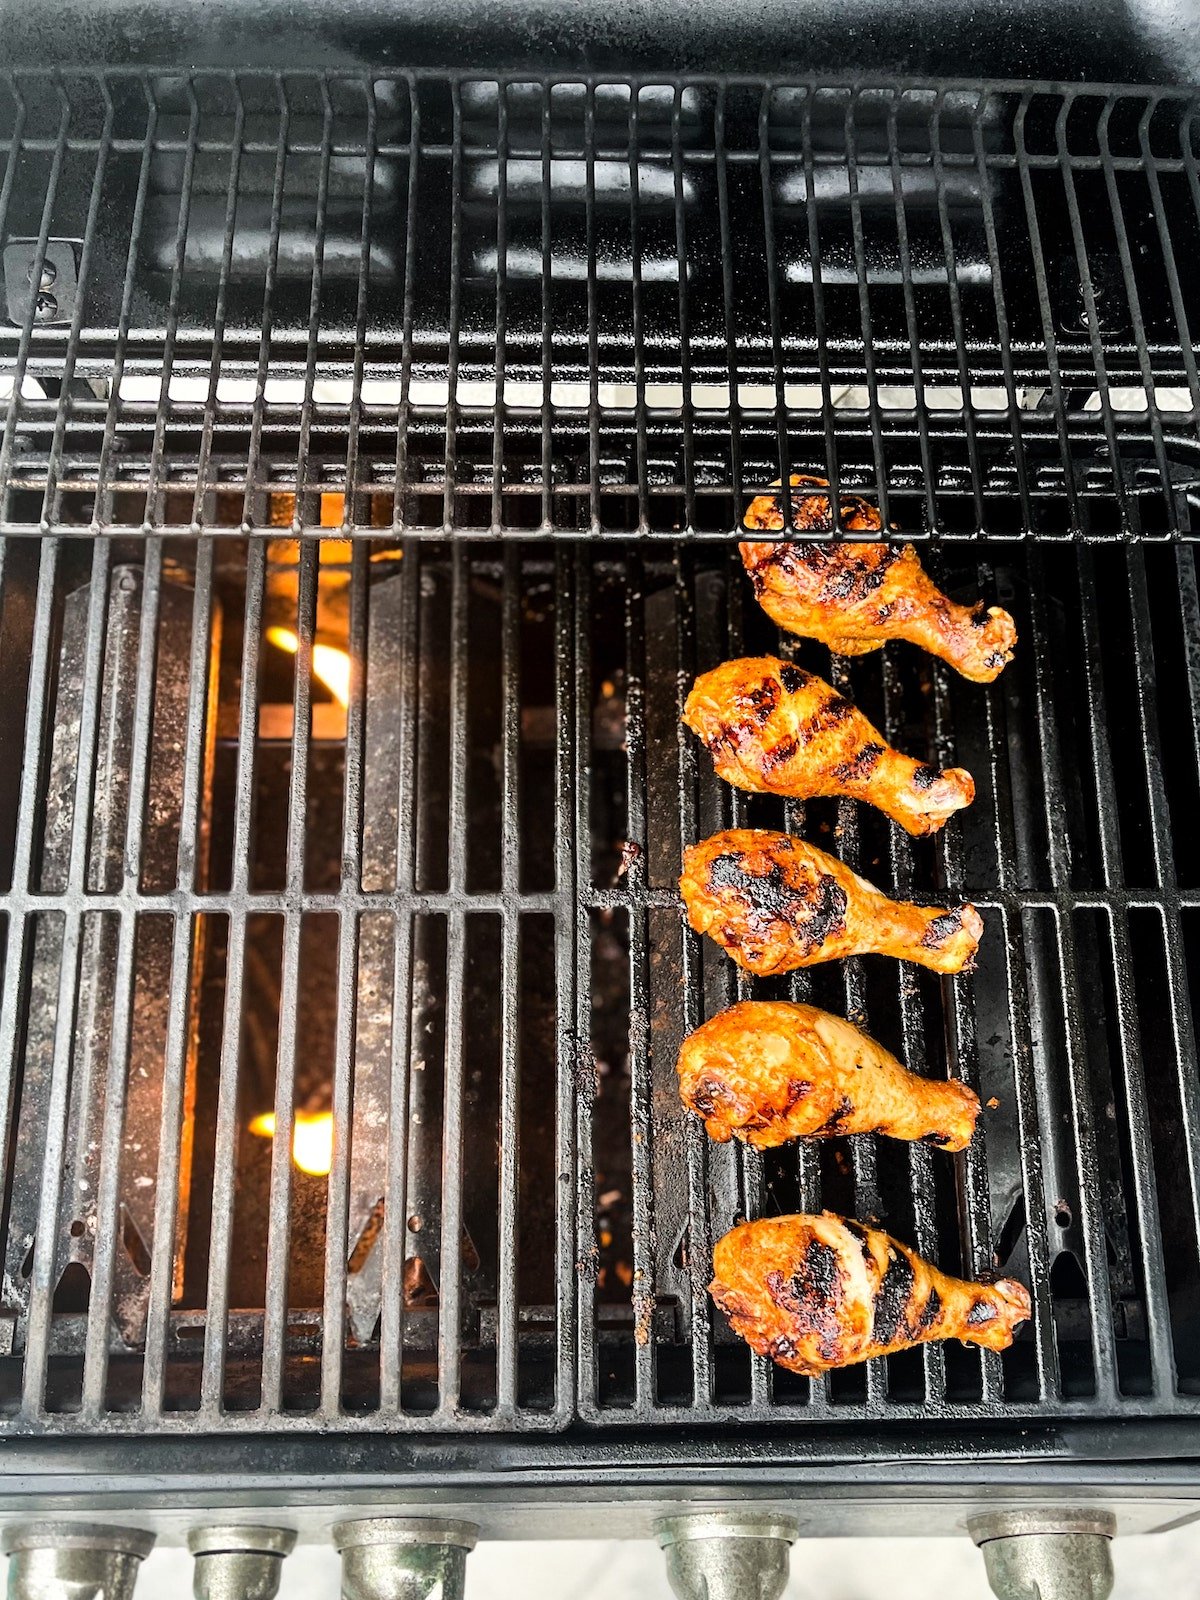 Chicken legs on the side of the grill with the burners turned on.